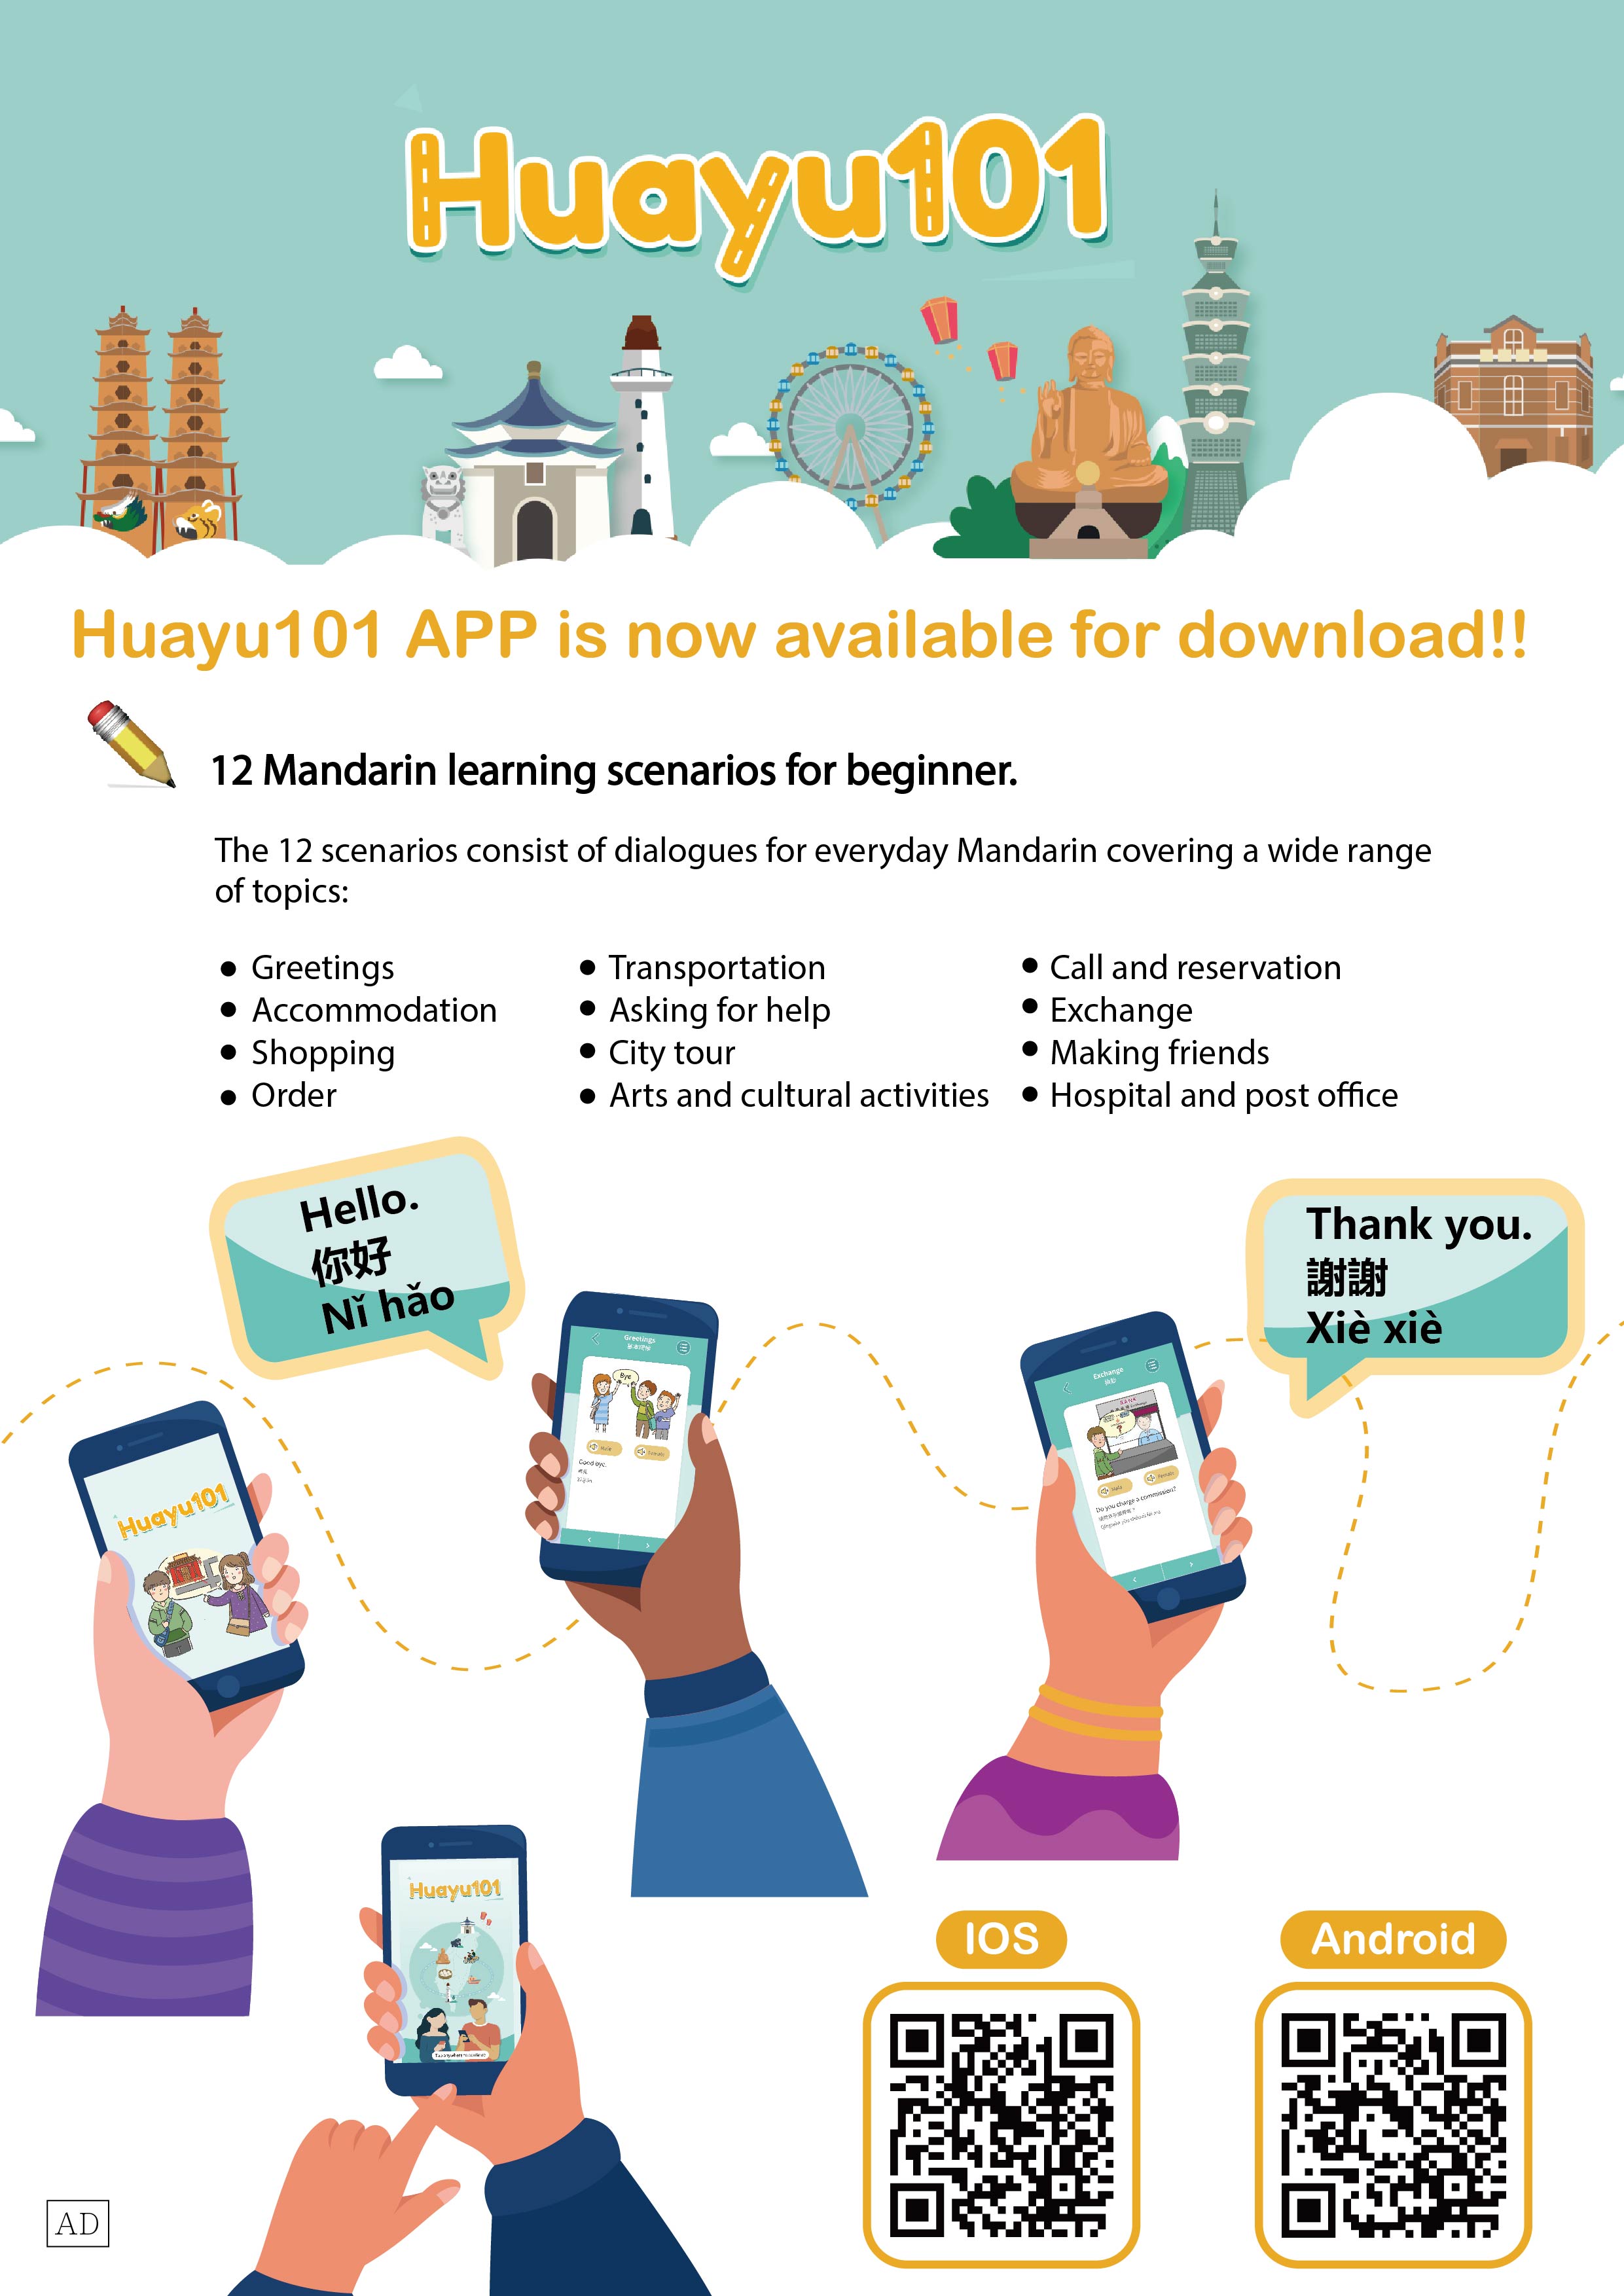 Please click the link above to download  Huayu 101 DM